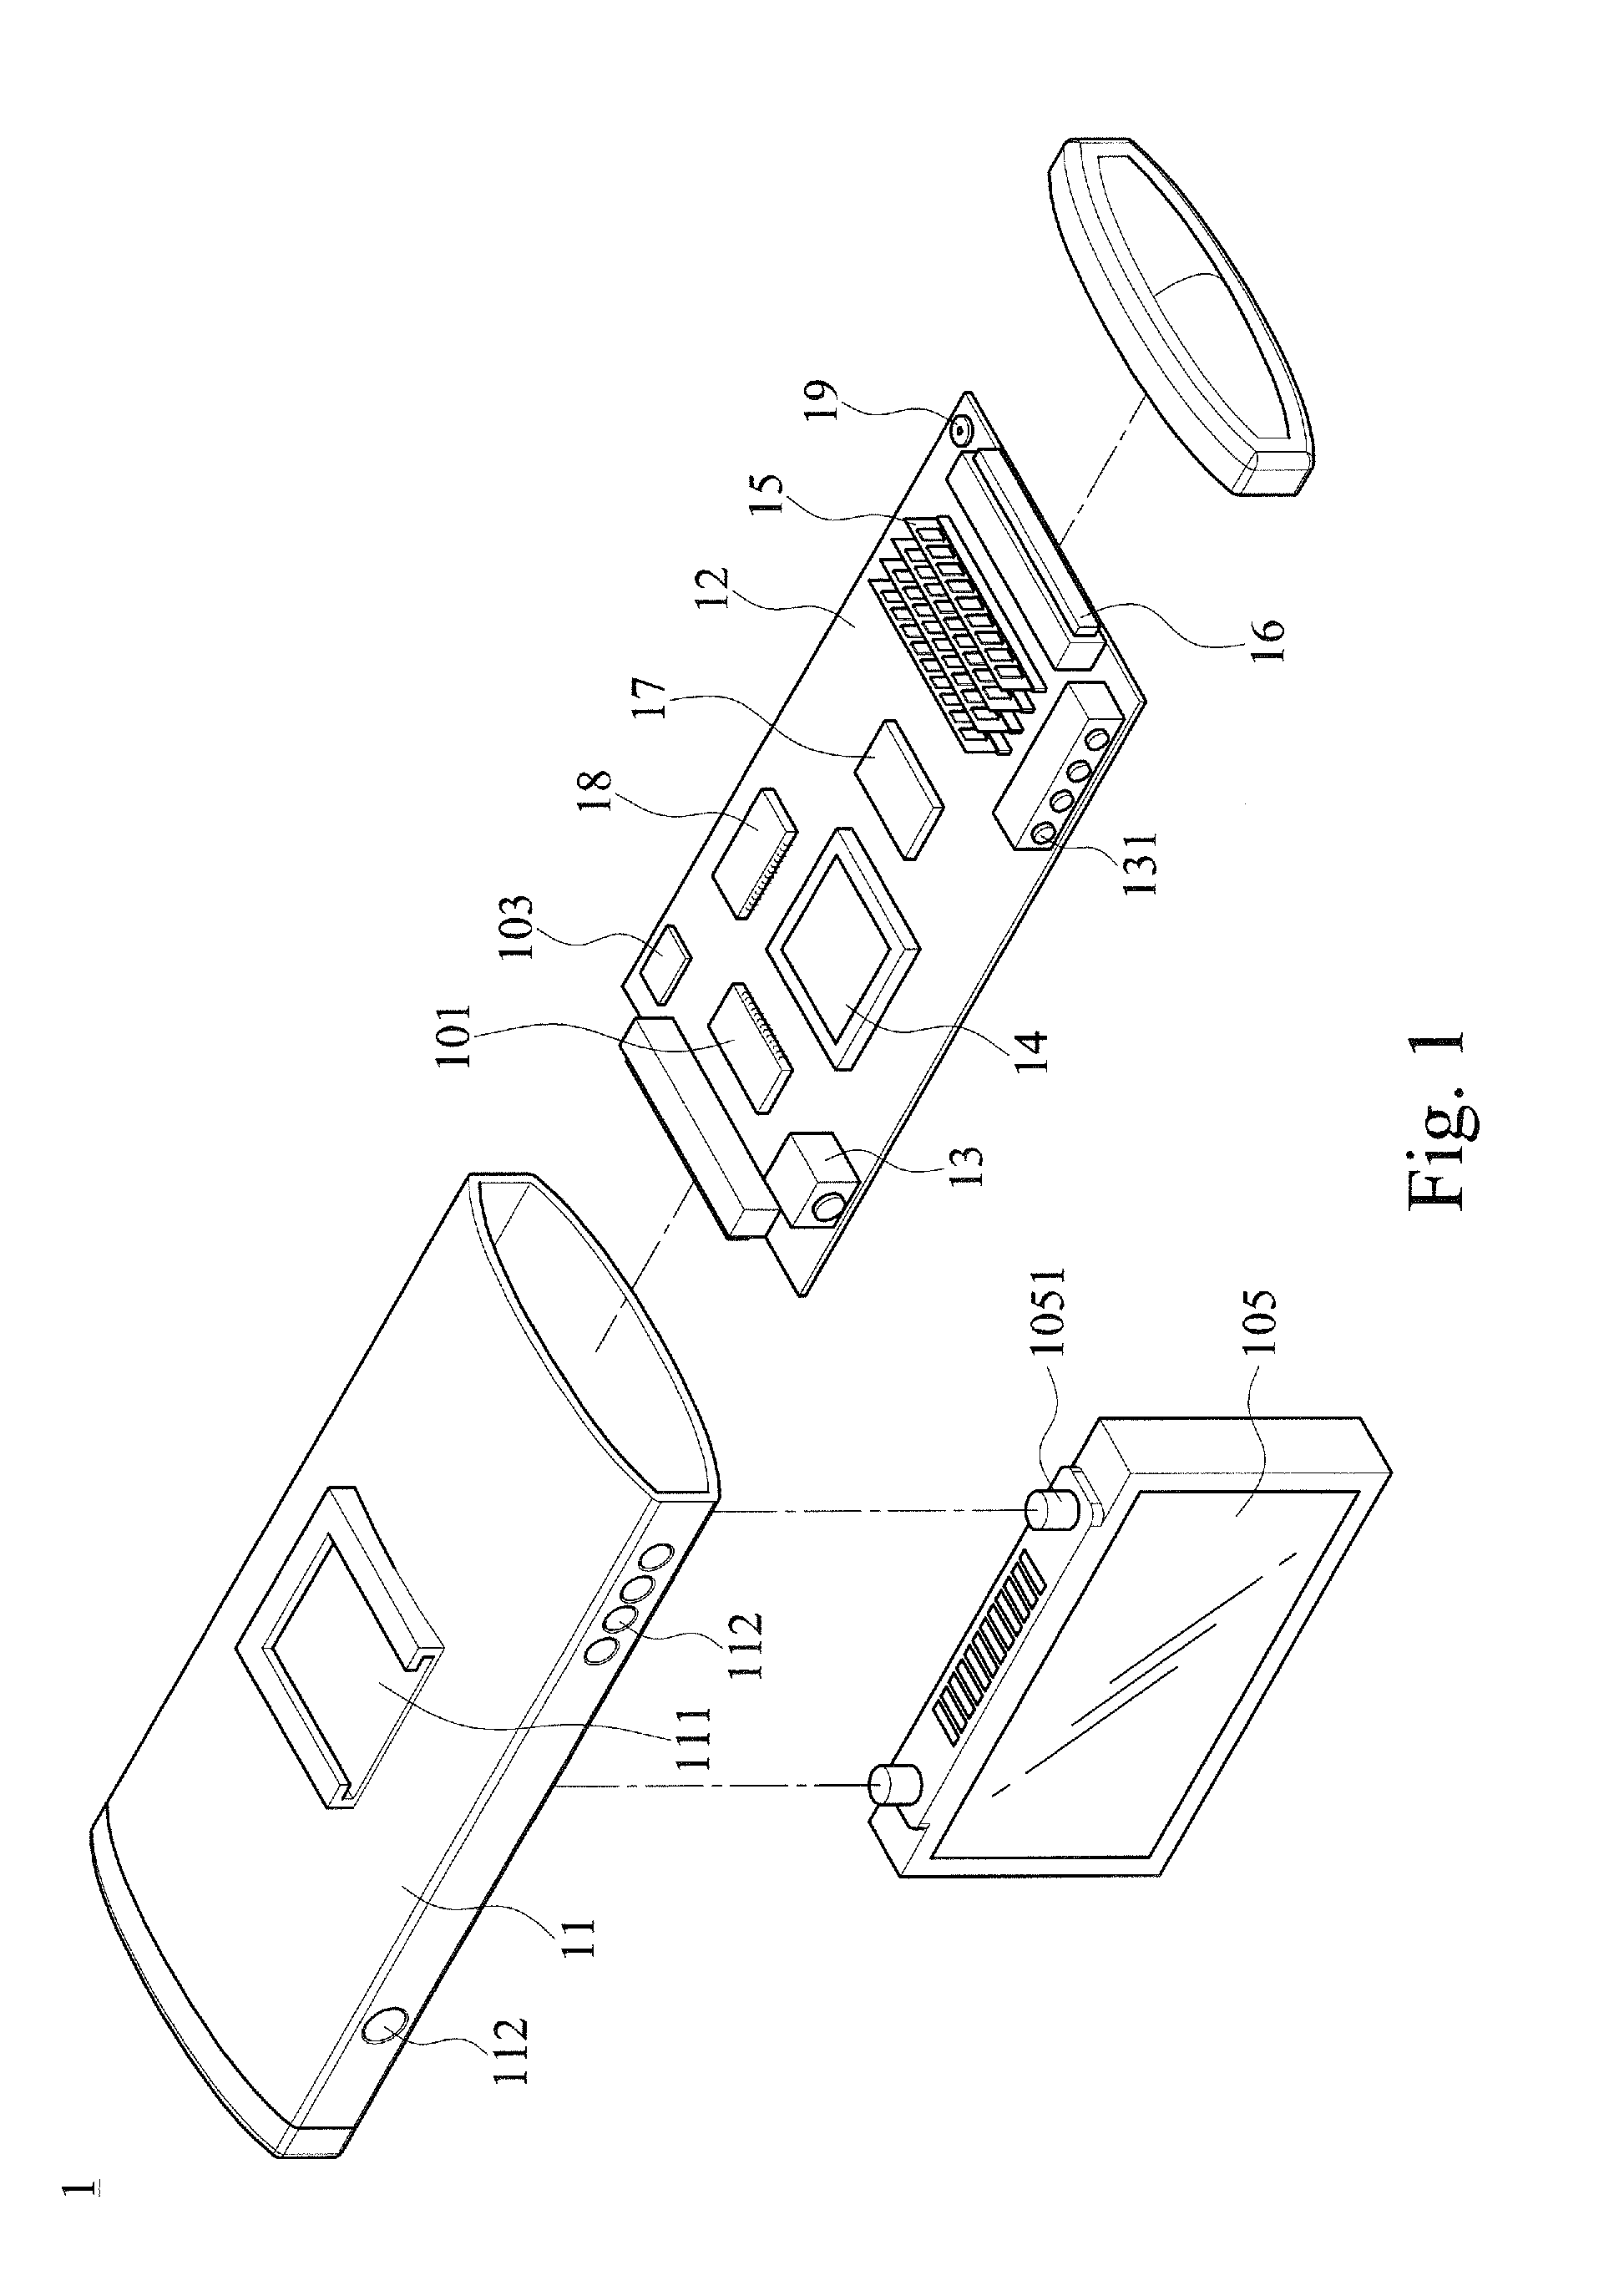 Real-time mobile video reporting device